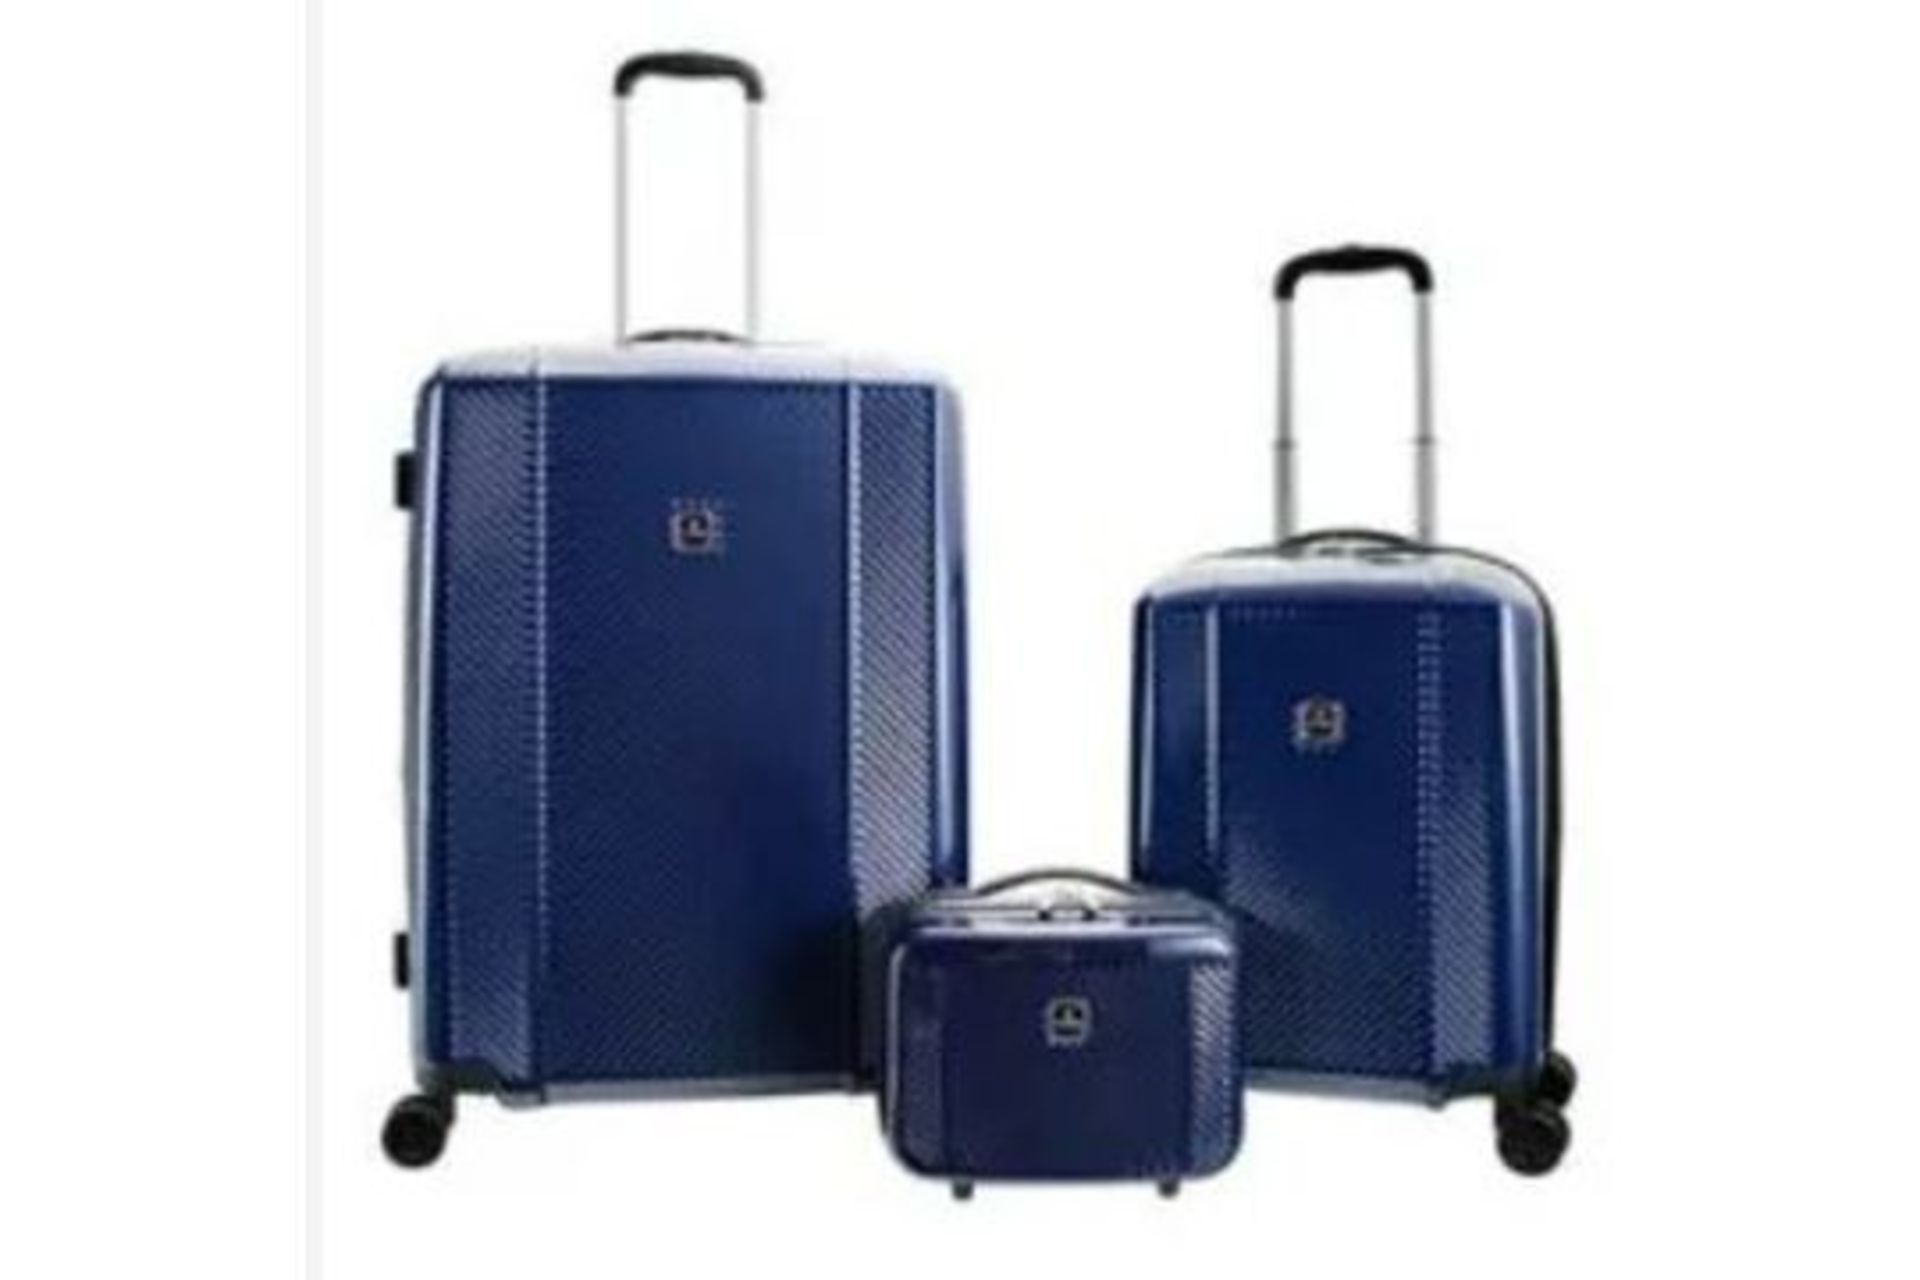 New Boxed 3 Piece Sets of TAG Spectrum Hardside Luggage Set. (BLUE). RRP £199.99 per set. Get